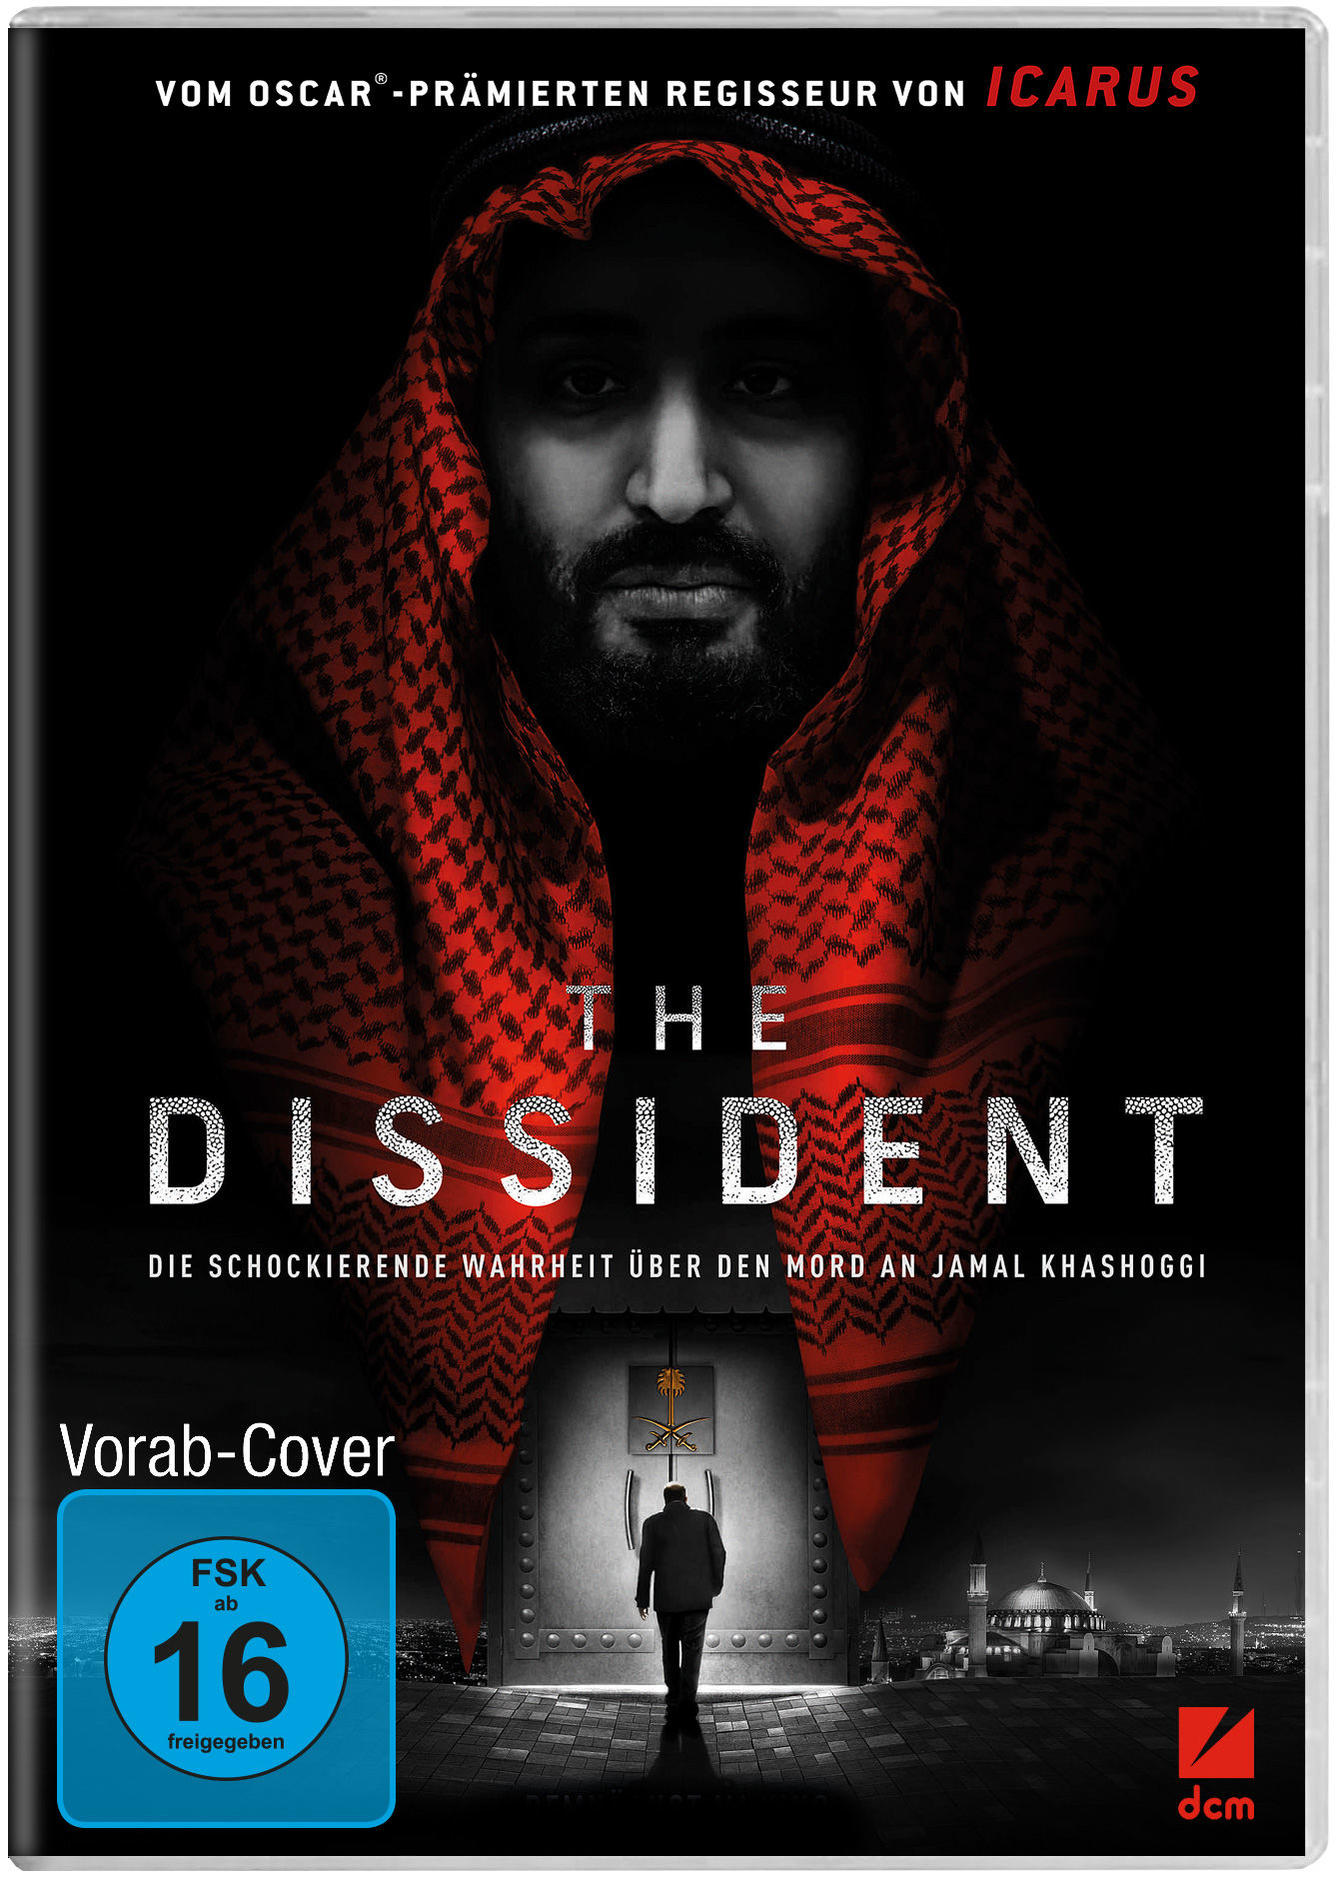 The DVD Dissident